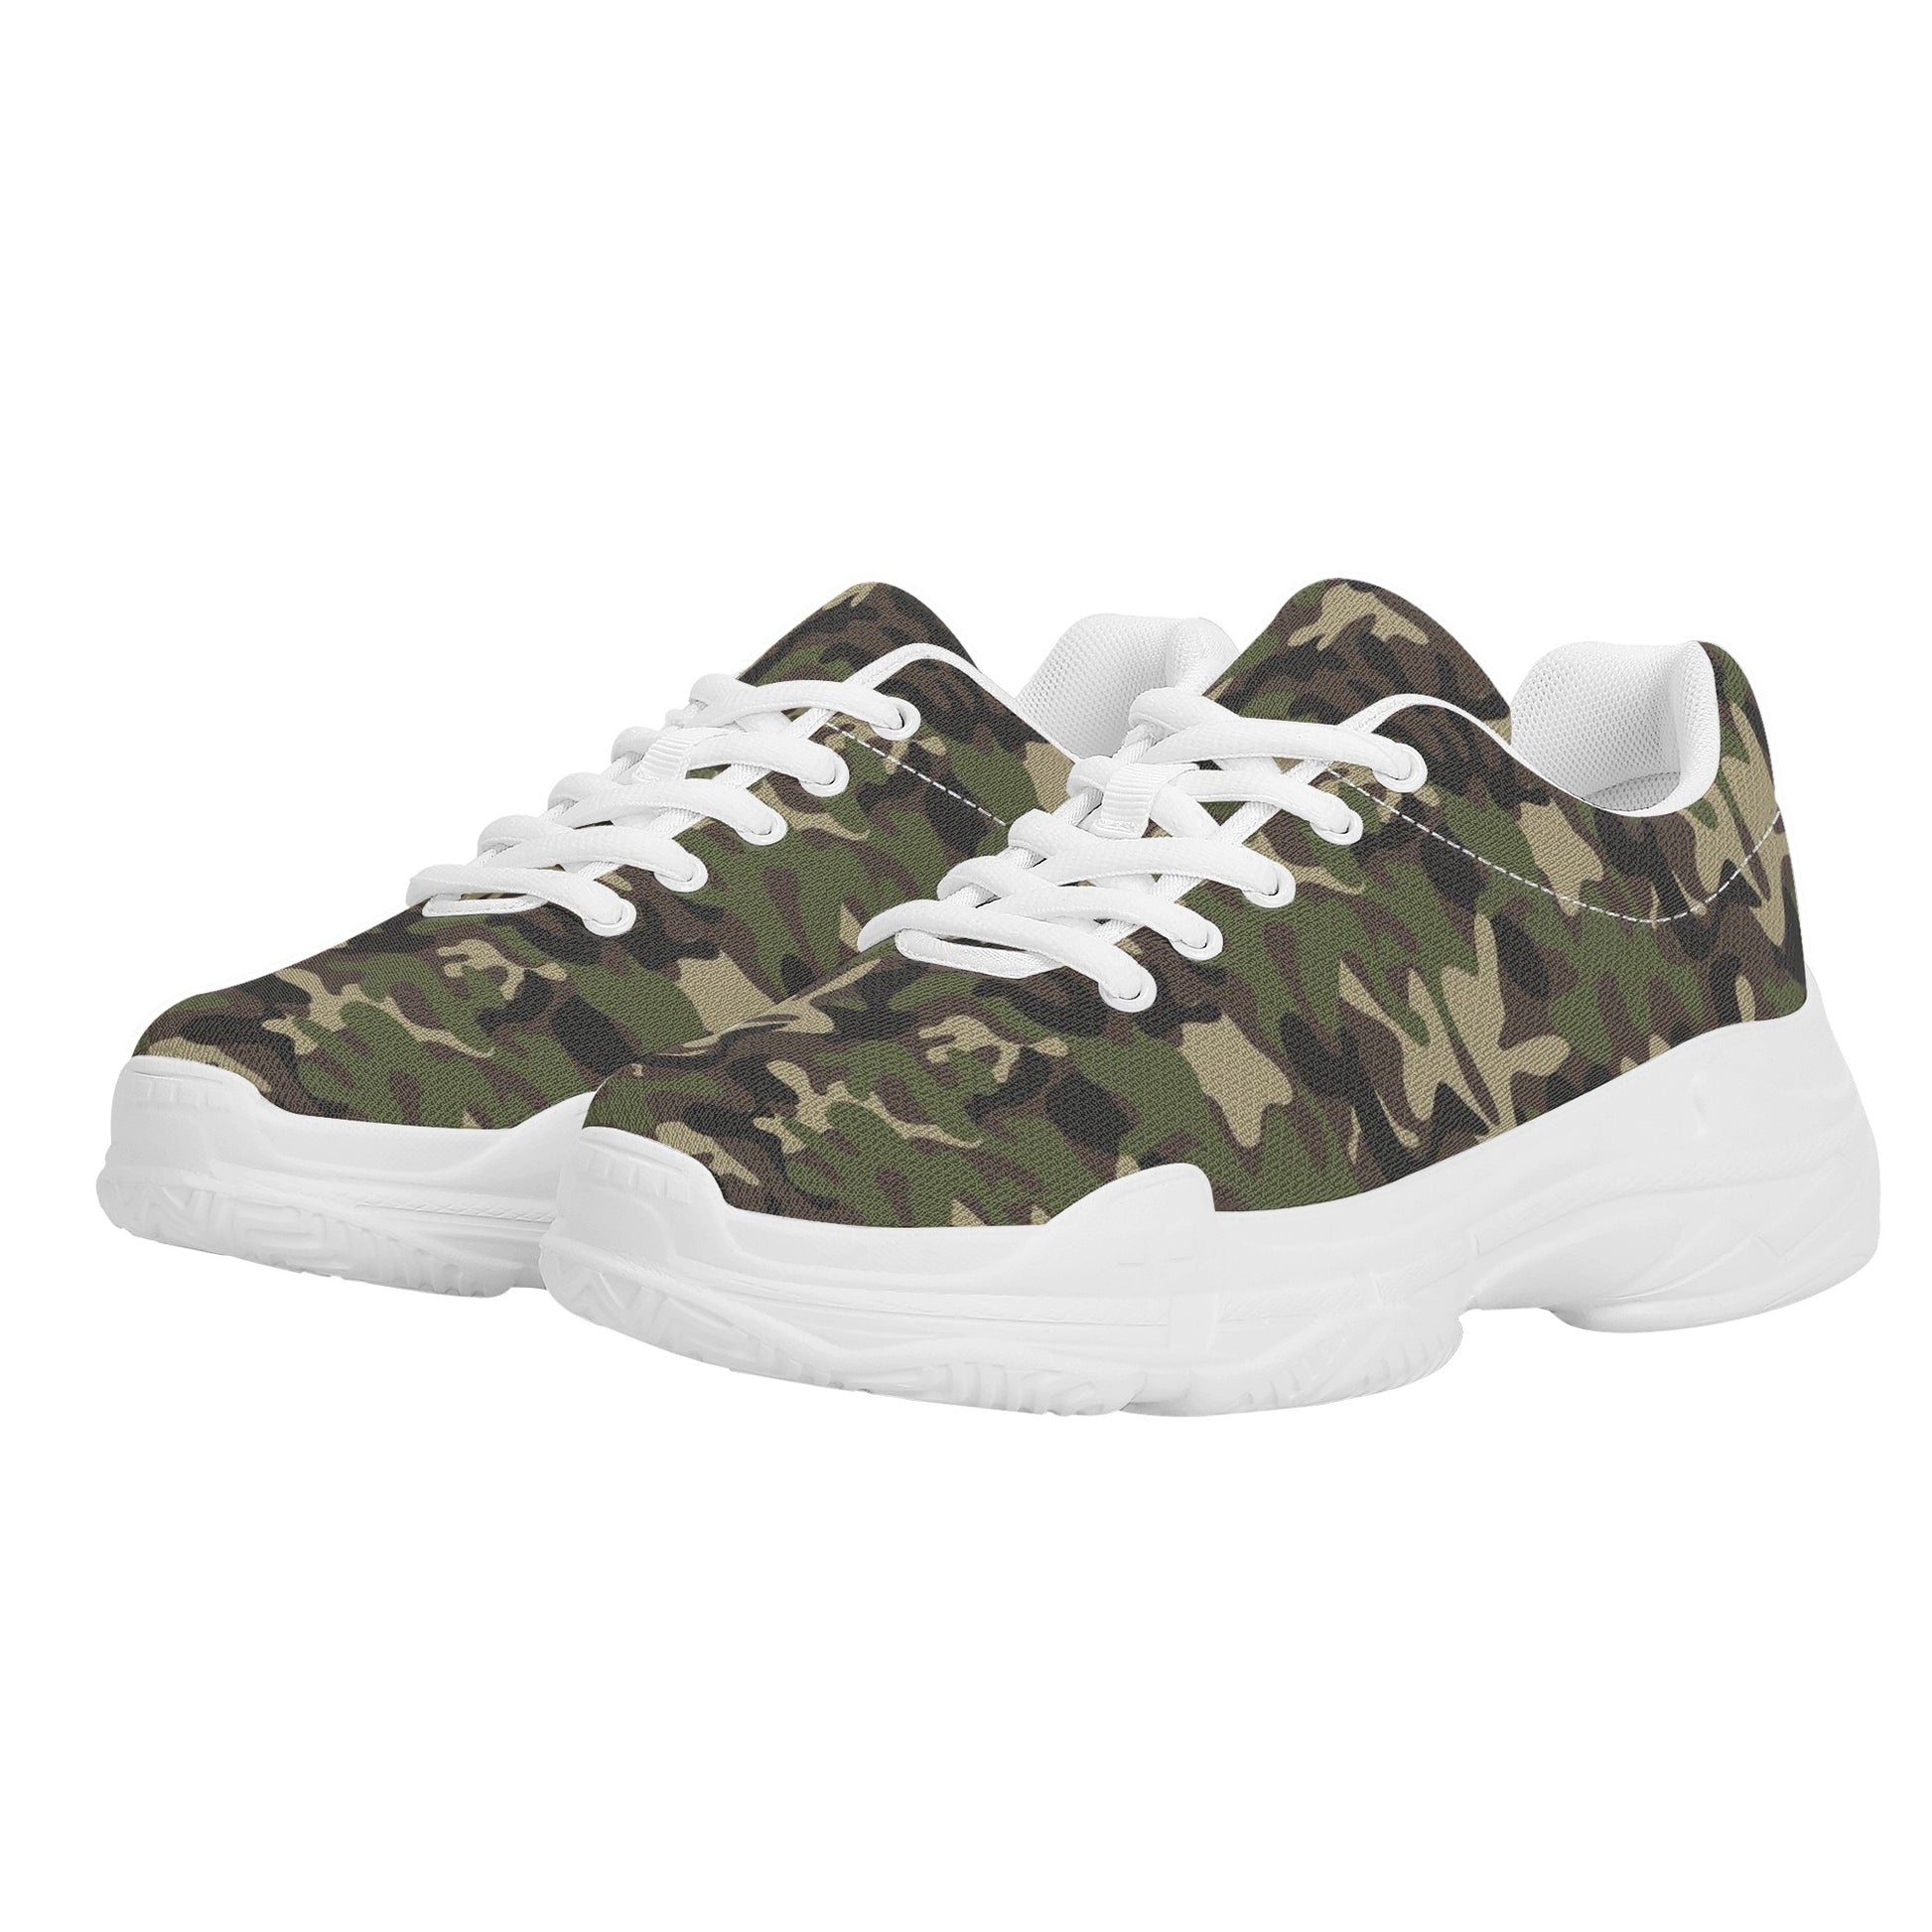 Green Camo Men Chunky Shoes, Camouflage Army Lace Up Exercise Unique Designer Custom Canvas Casual Fashion Streetwear Sneakers Starcove Fashion